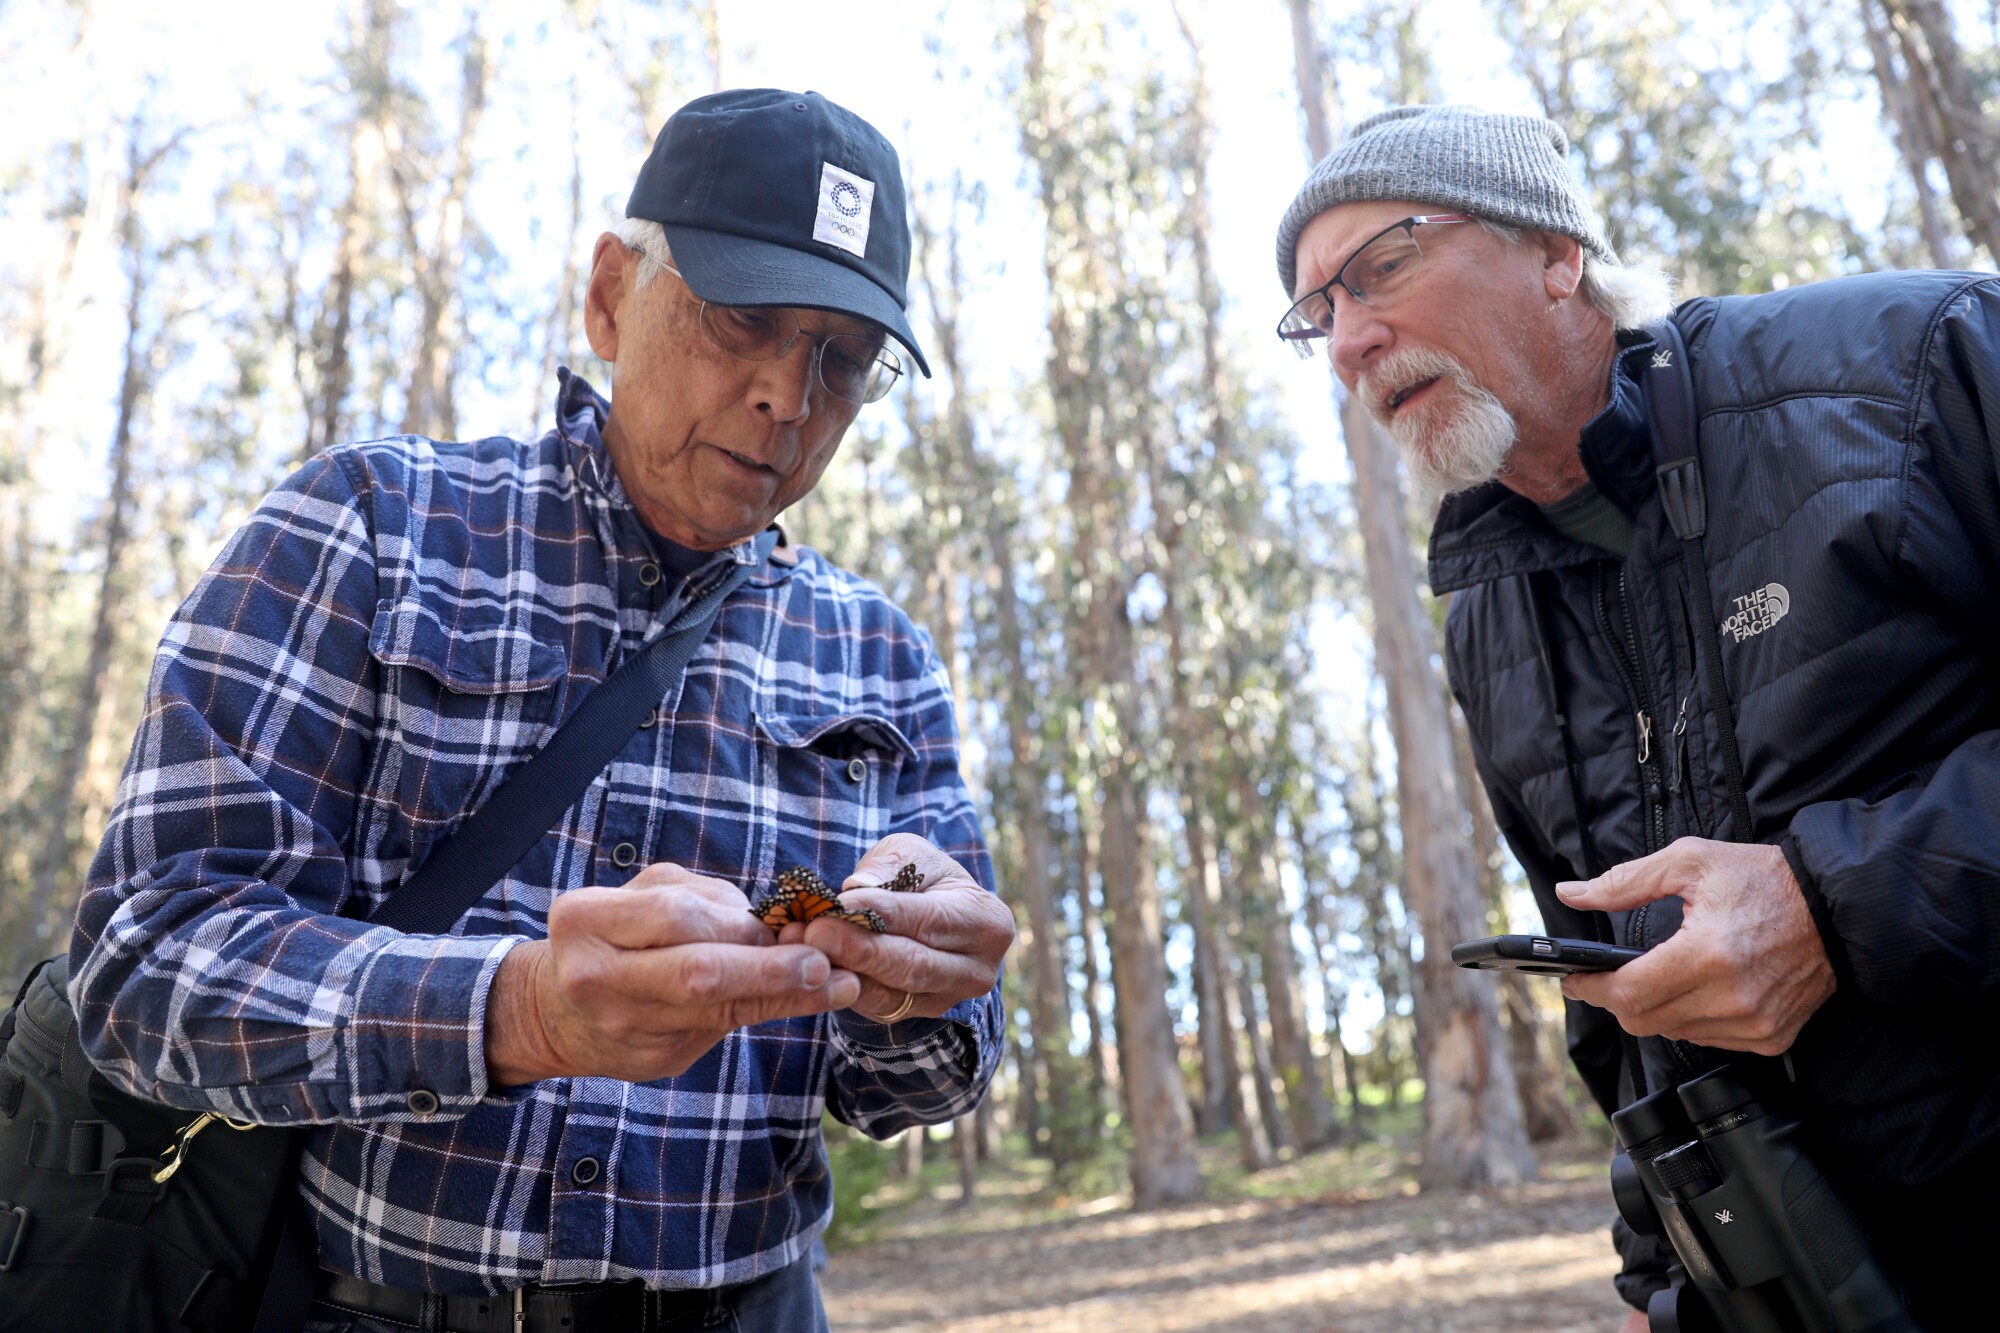 Kingston Leong, left, with enthusiast Cliff Stiffler, examines a monarch butterfly